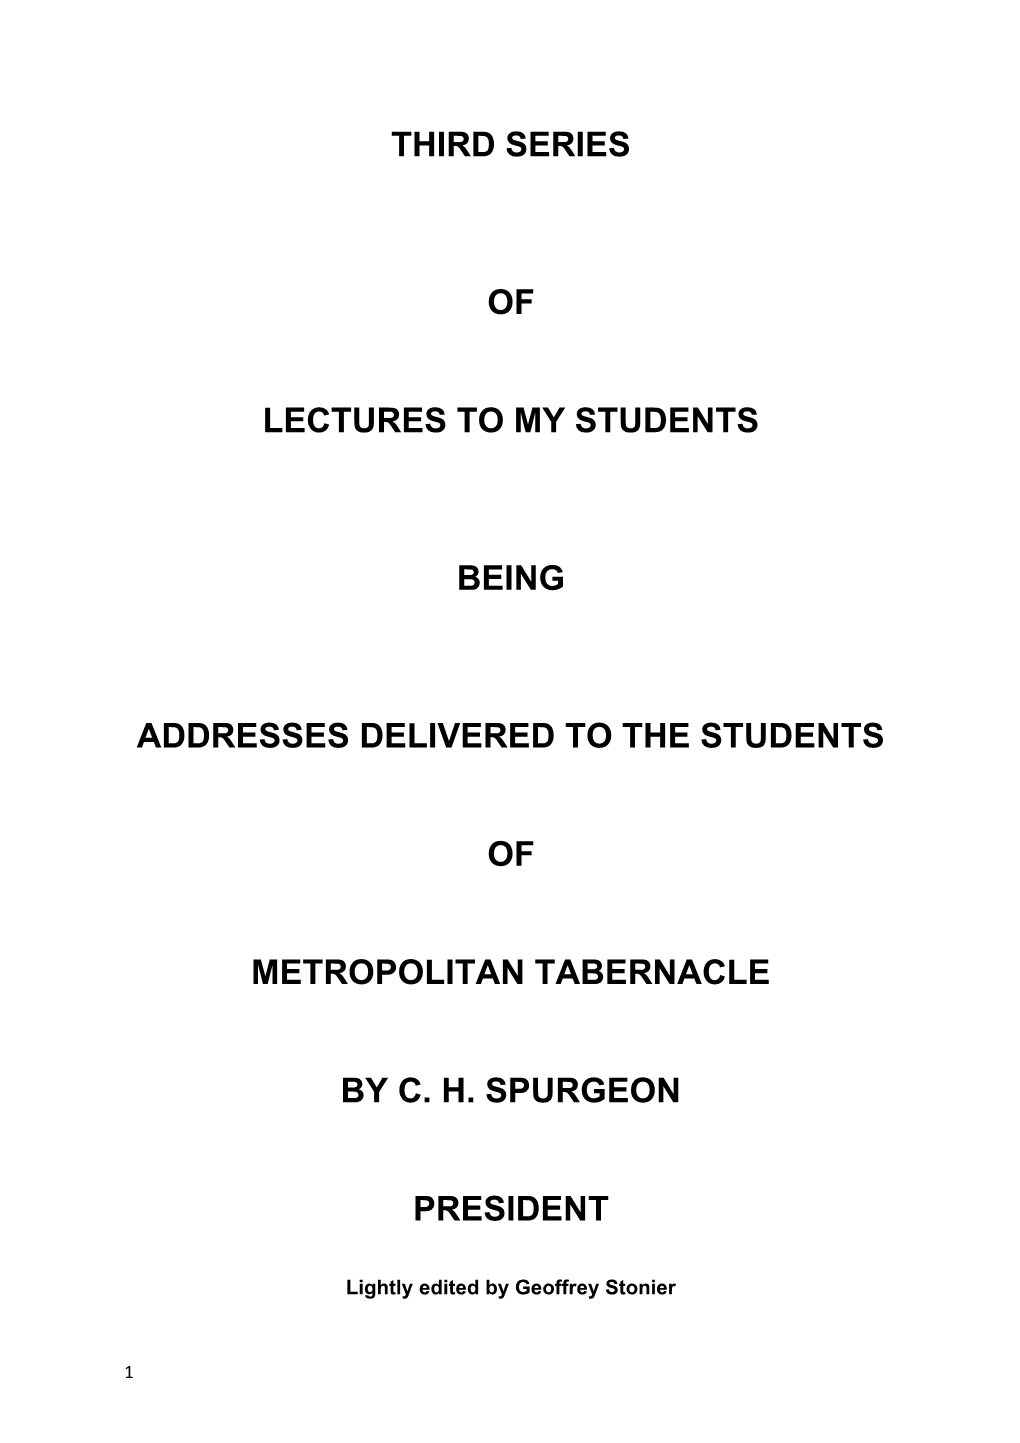 Addresses Delivered to the Students